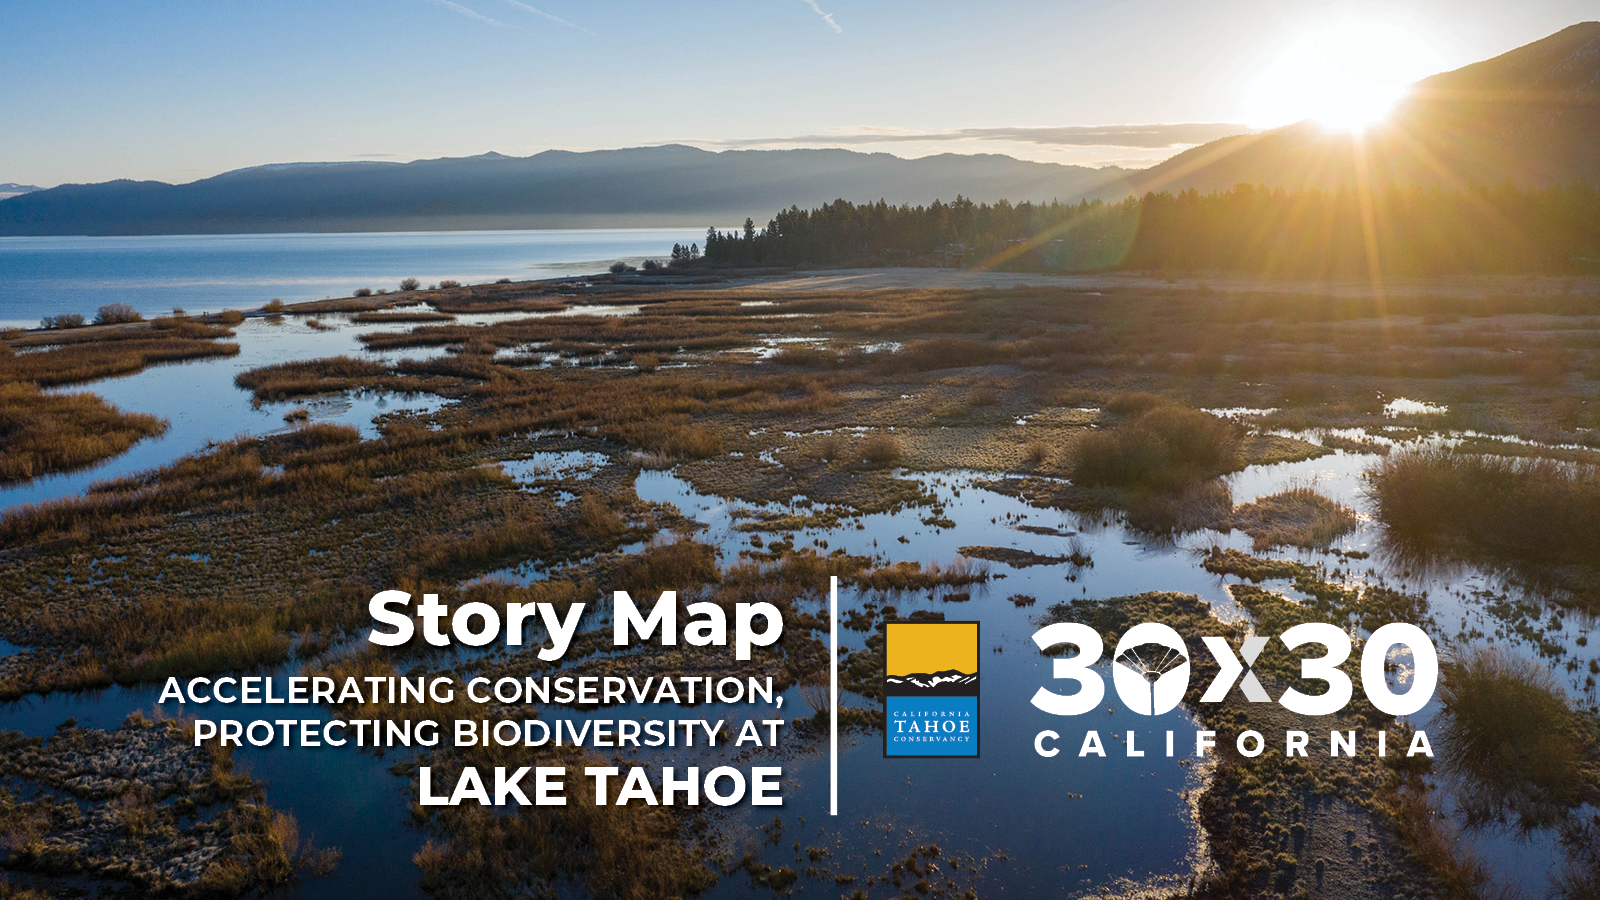 Upper Truckee Marsh at Lake Tahoe and text saying Story Map: Accelerating Conservation, Protecting Biodiversity